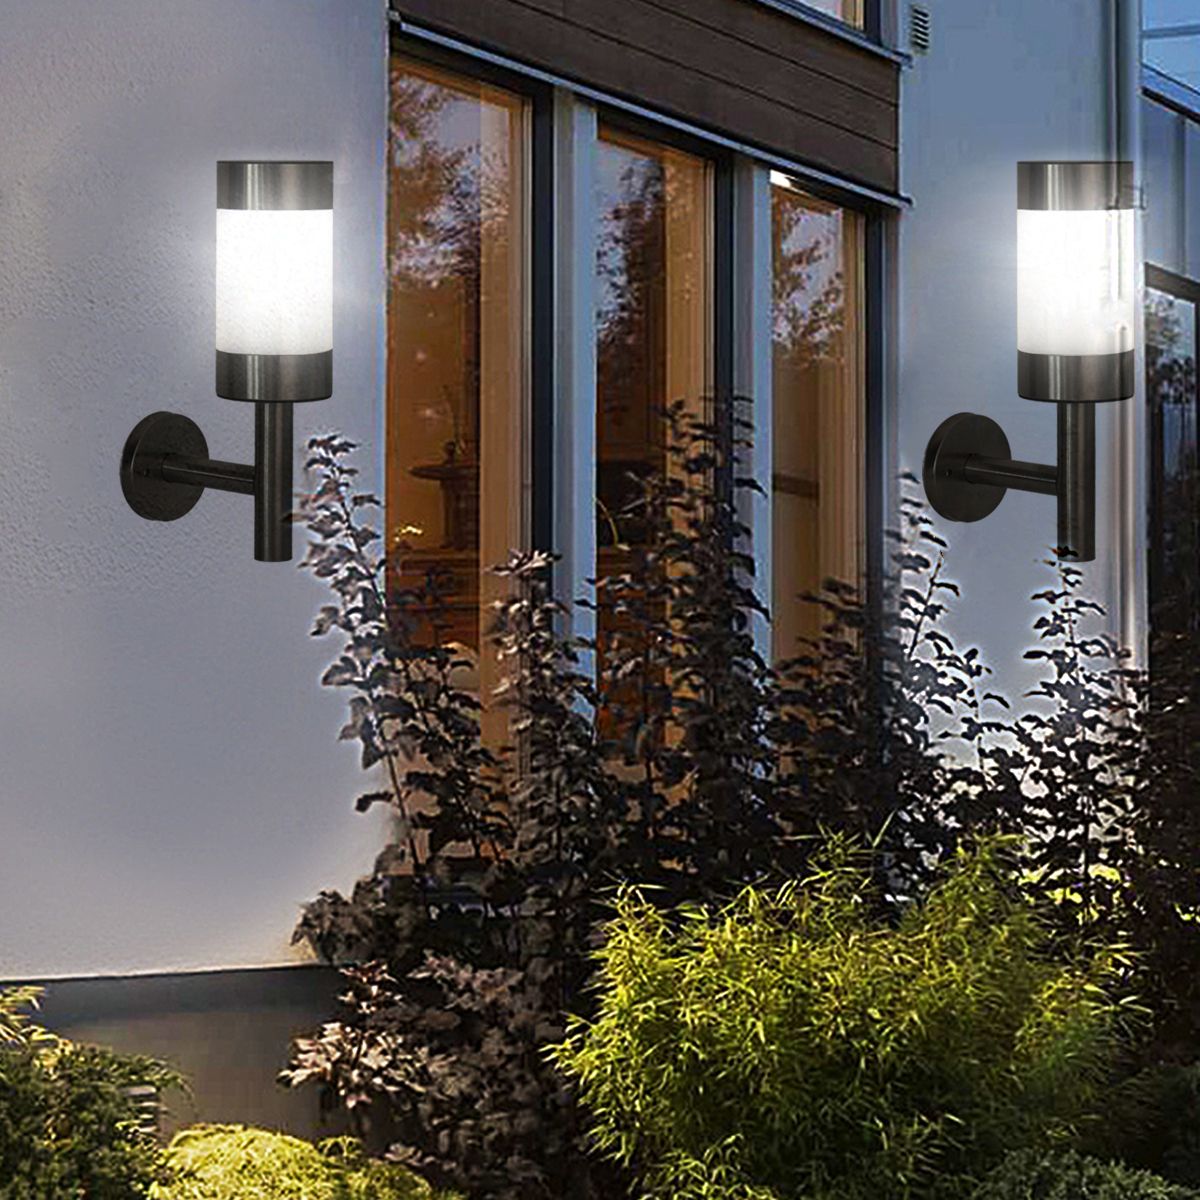 2x-Stainless-Steel-Solar-Powered-LED-Wall-Lights-Shed-Fence-Door-Outdoor-Garden-1757565